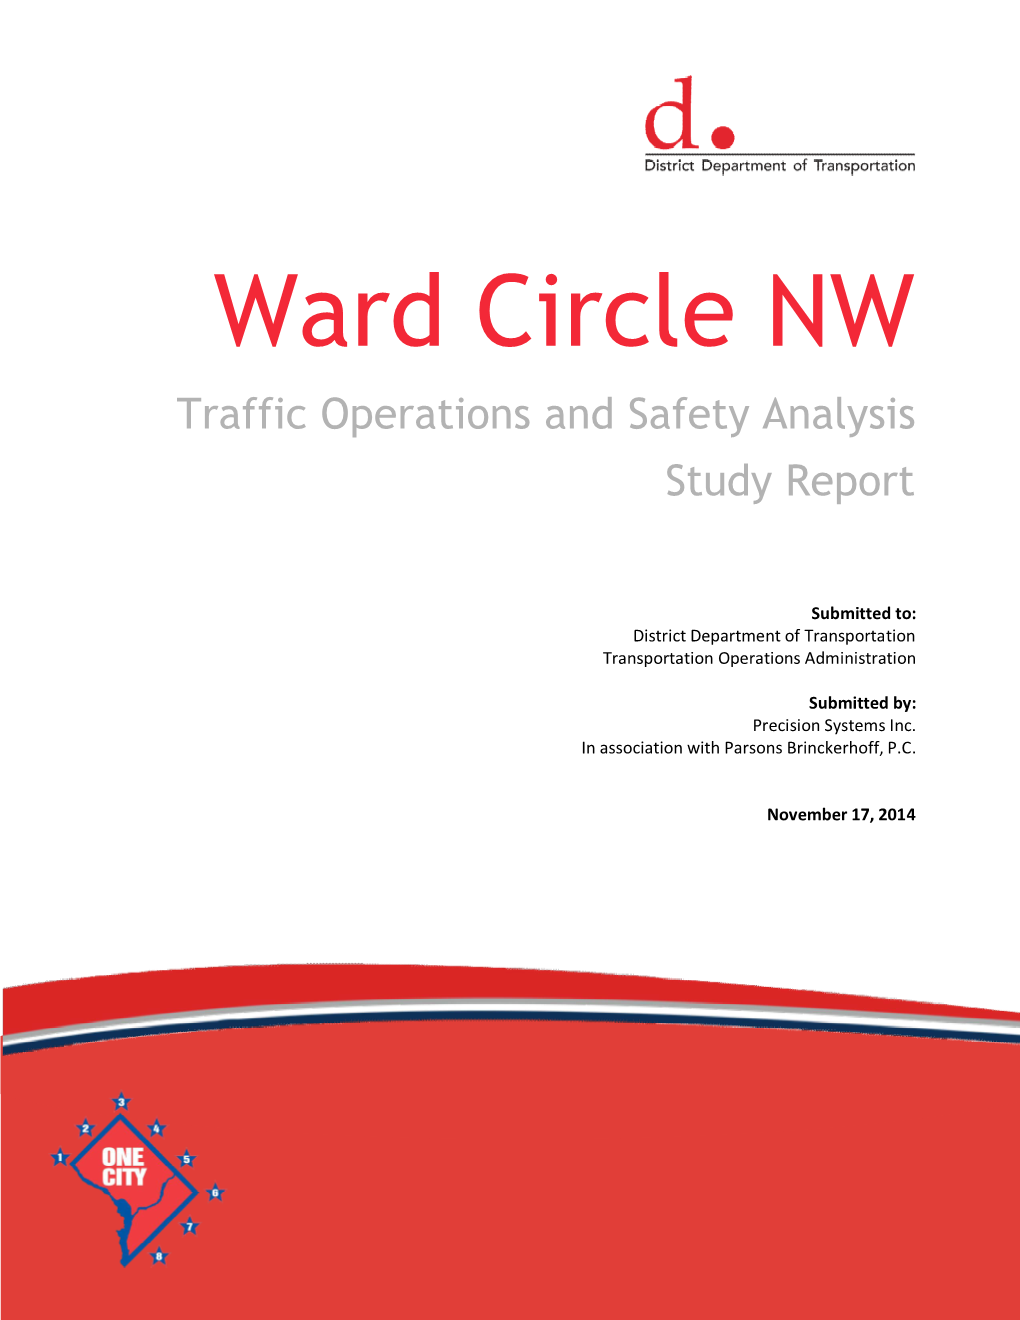 Ward Circle NW Traffic Operations and Safety Analysis Study Report